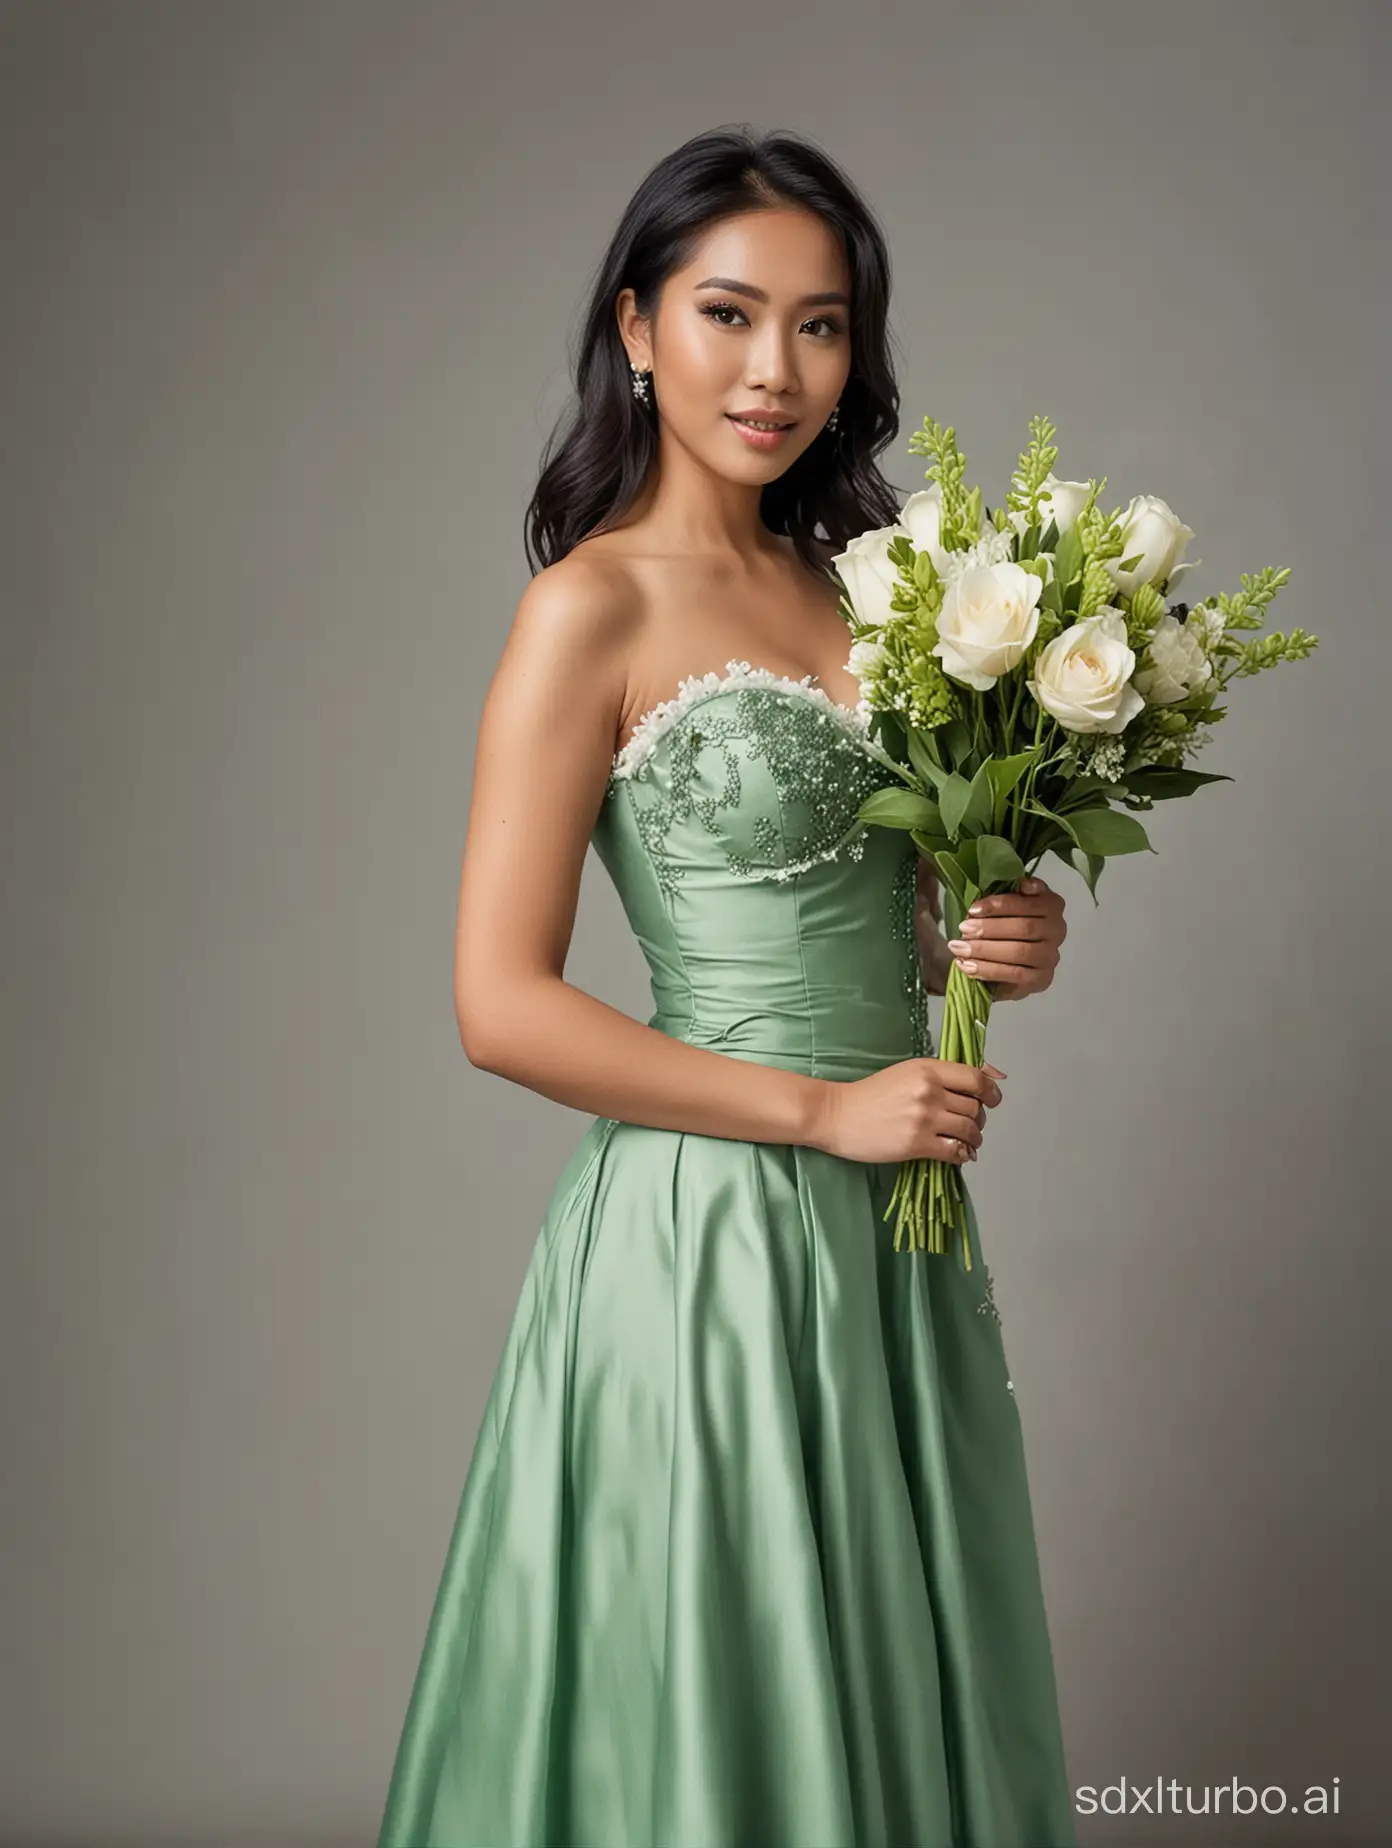 An Indonesian woman wearing a green bustier dress with bridal make-up is standing holding flowers